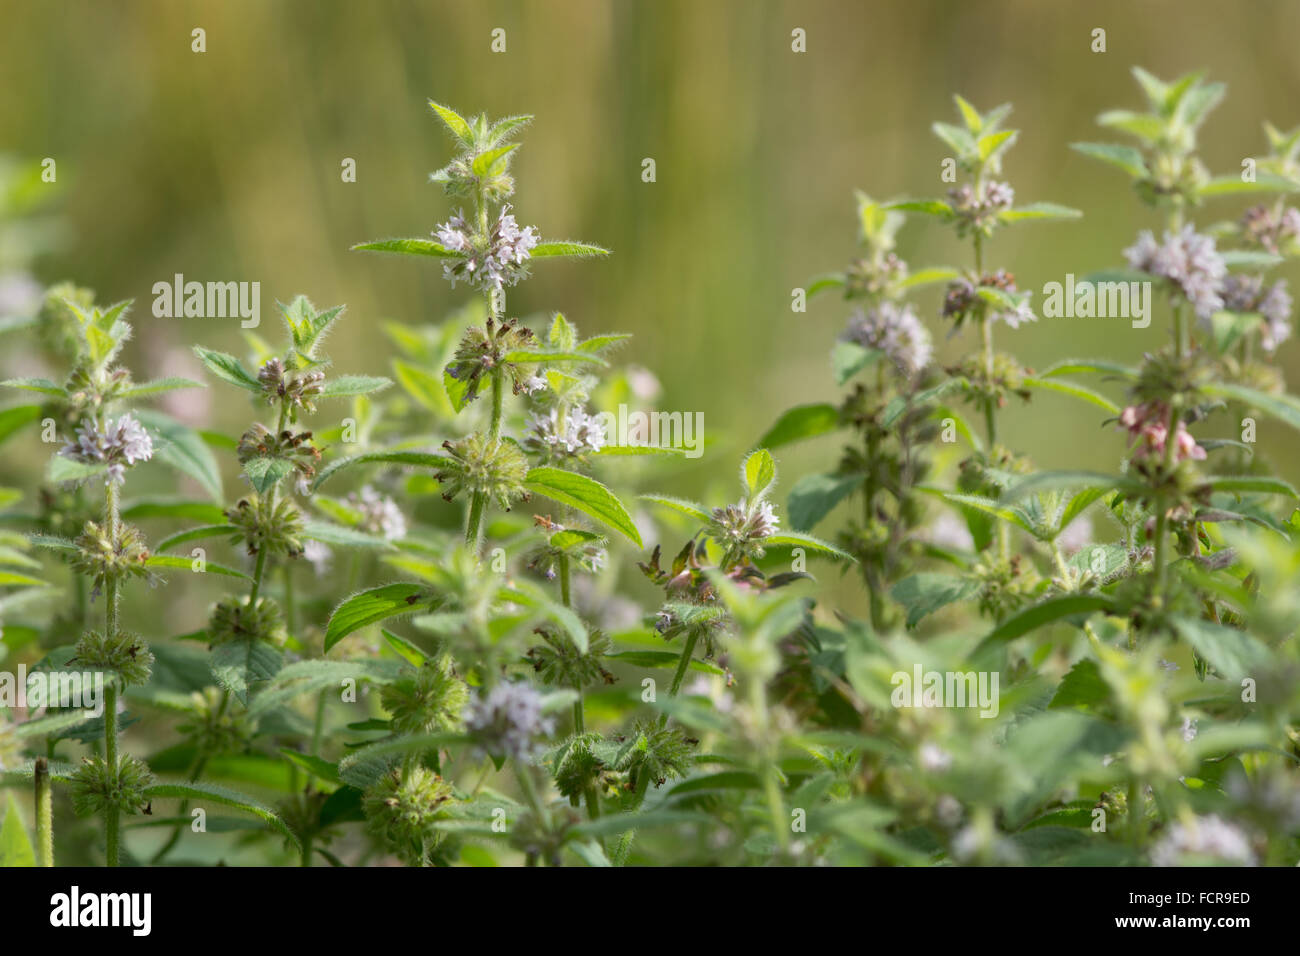 Corn mint (Mentha arvensis) in flower. A wild mint plant flowering in the family Lamiaceae Stock Photo